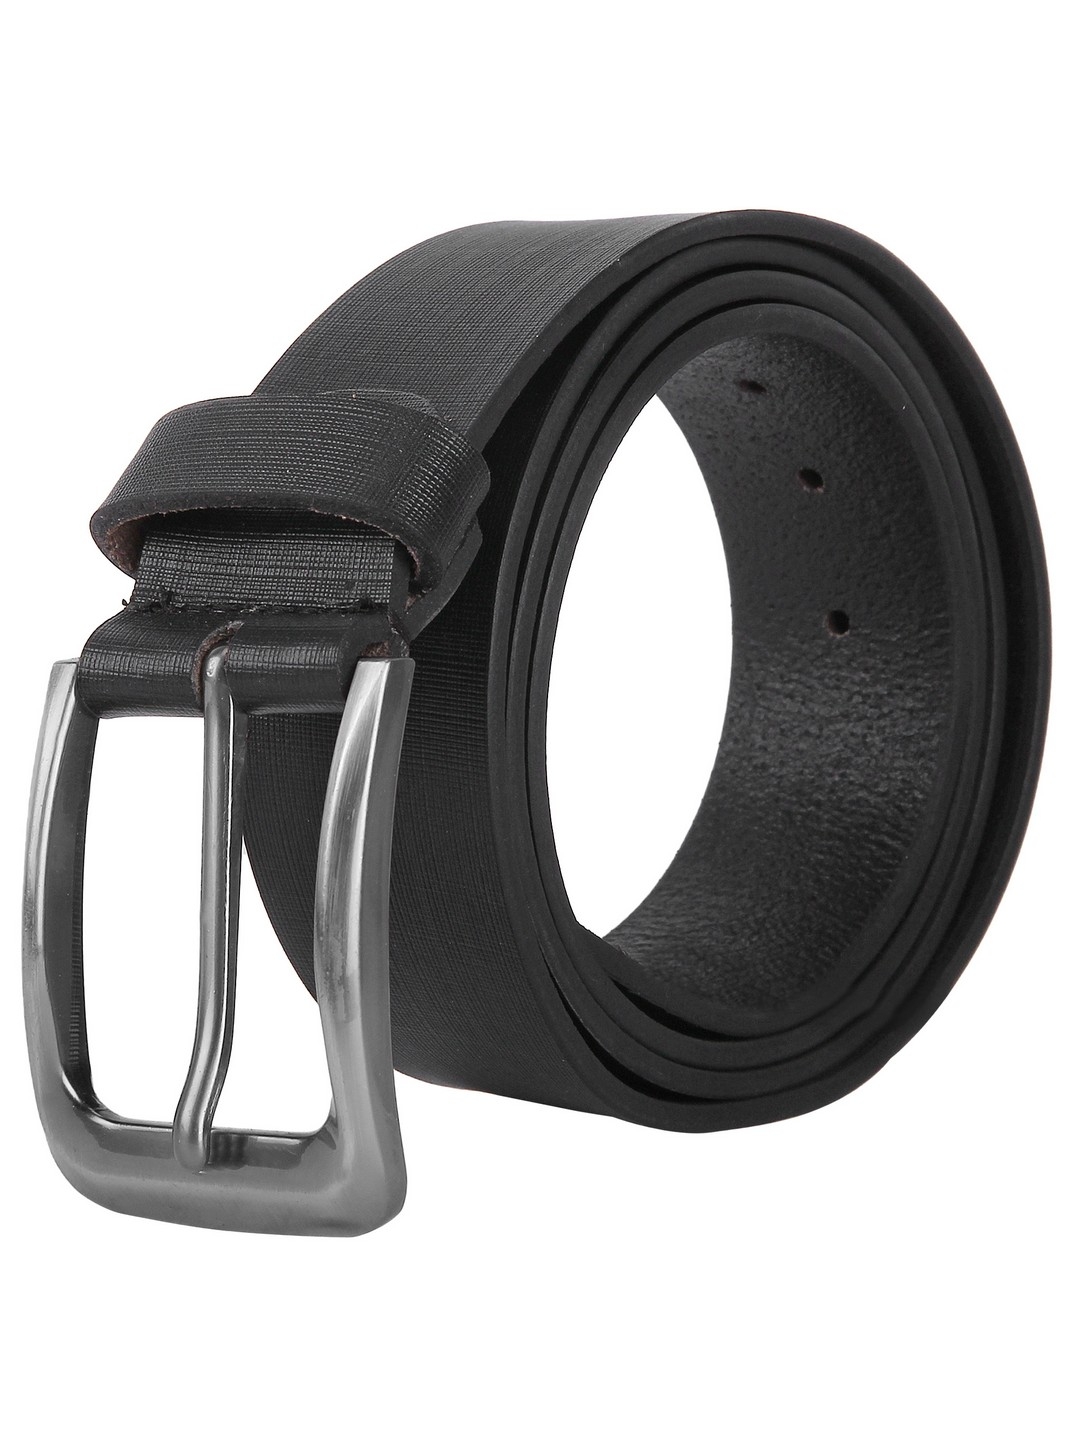 CREATURE | Creature Formal/Casual Black Genuine Leather Belts For Men